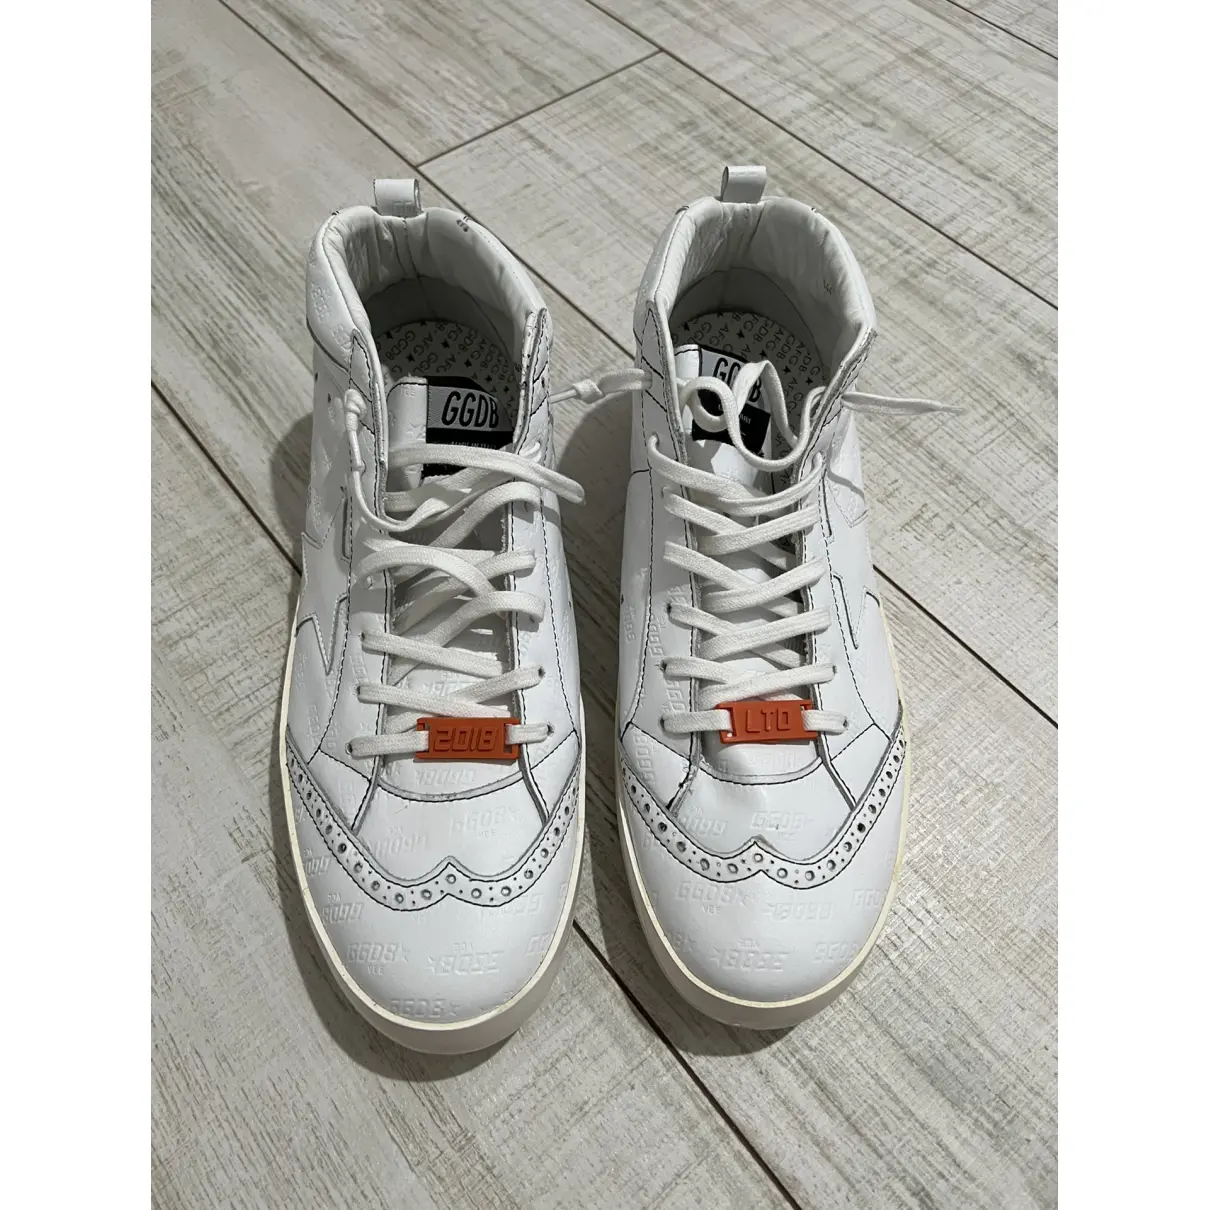 Buy Golden Goose Mid Star leather high trainers online